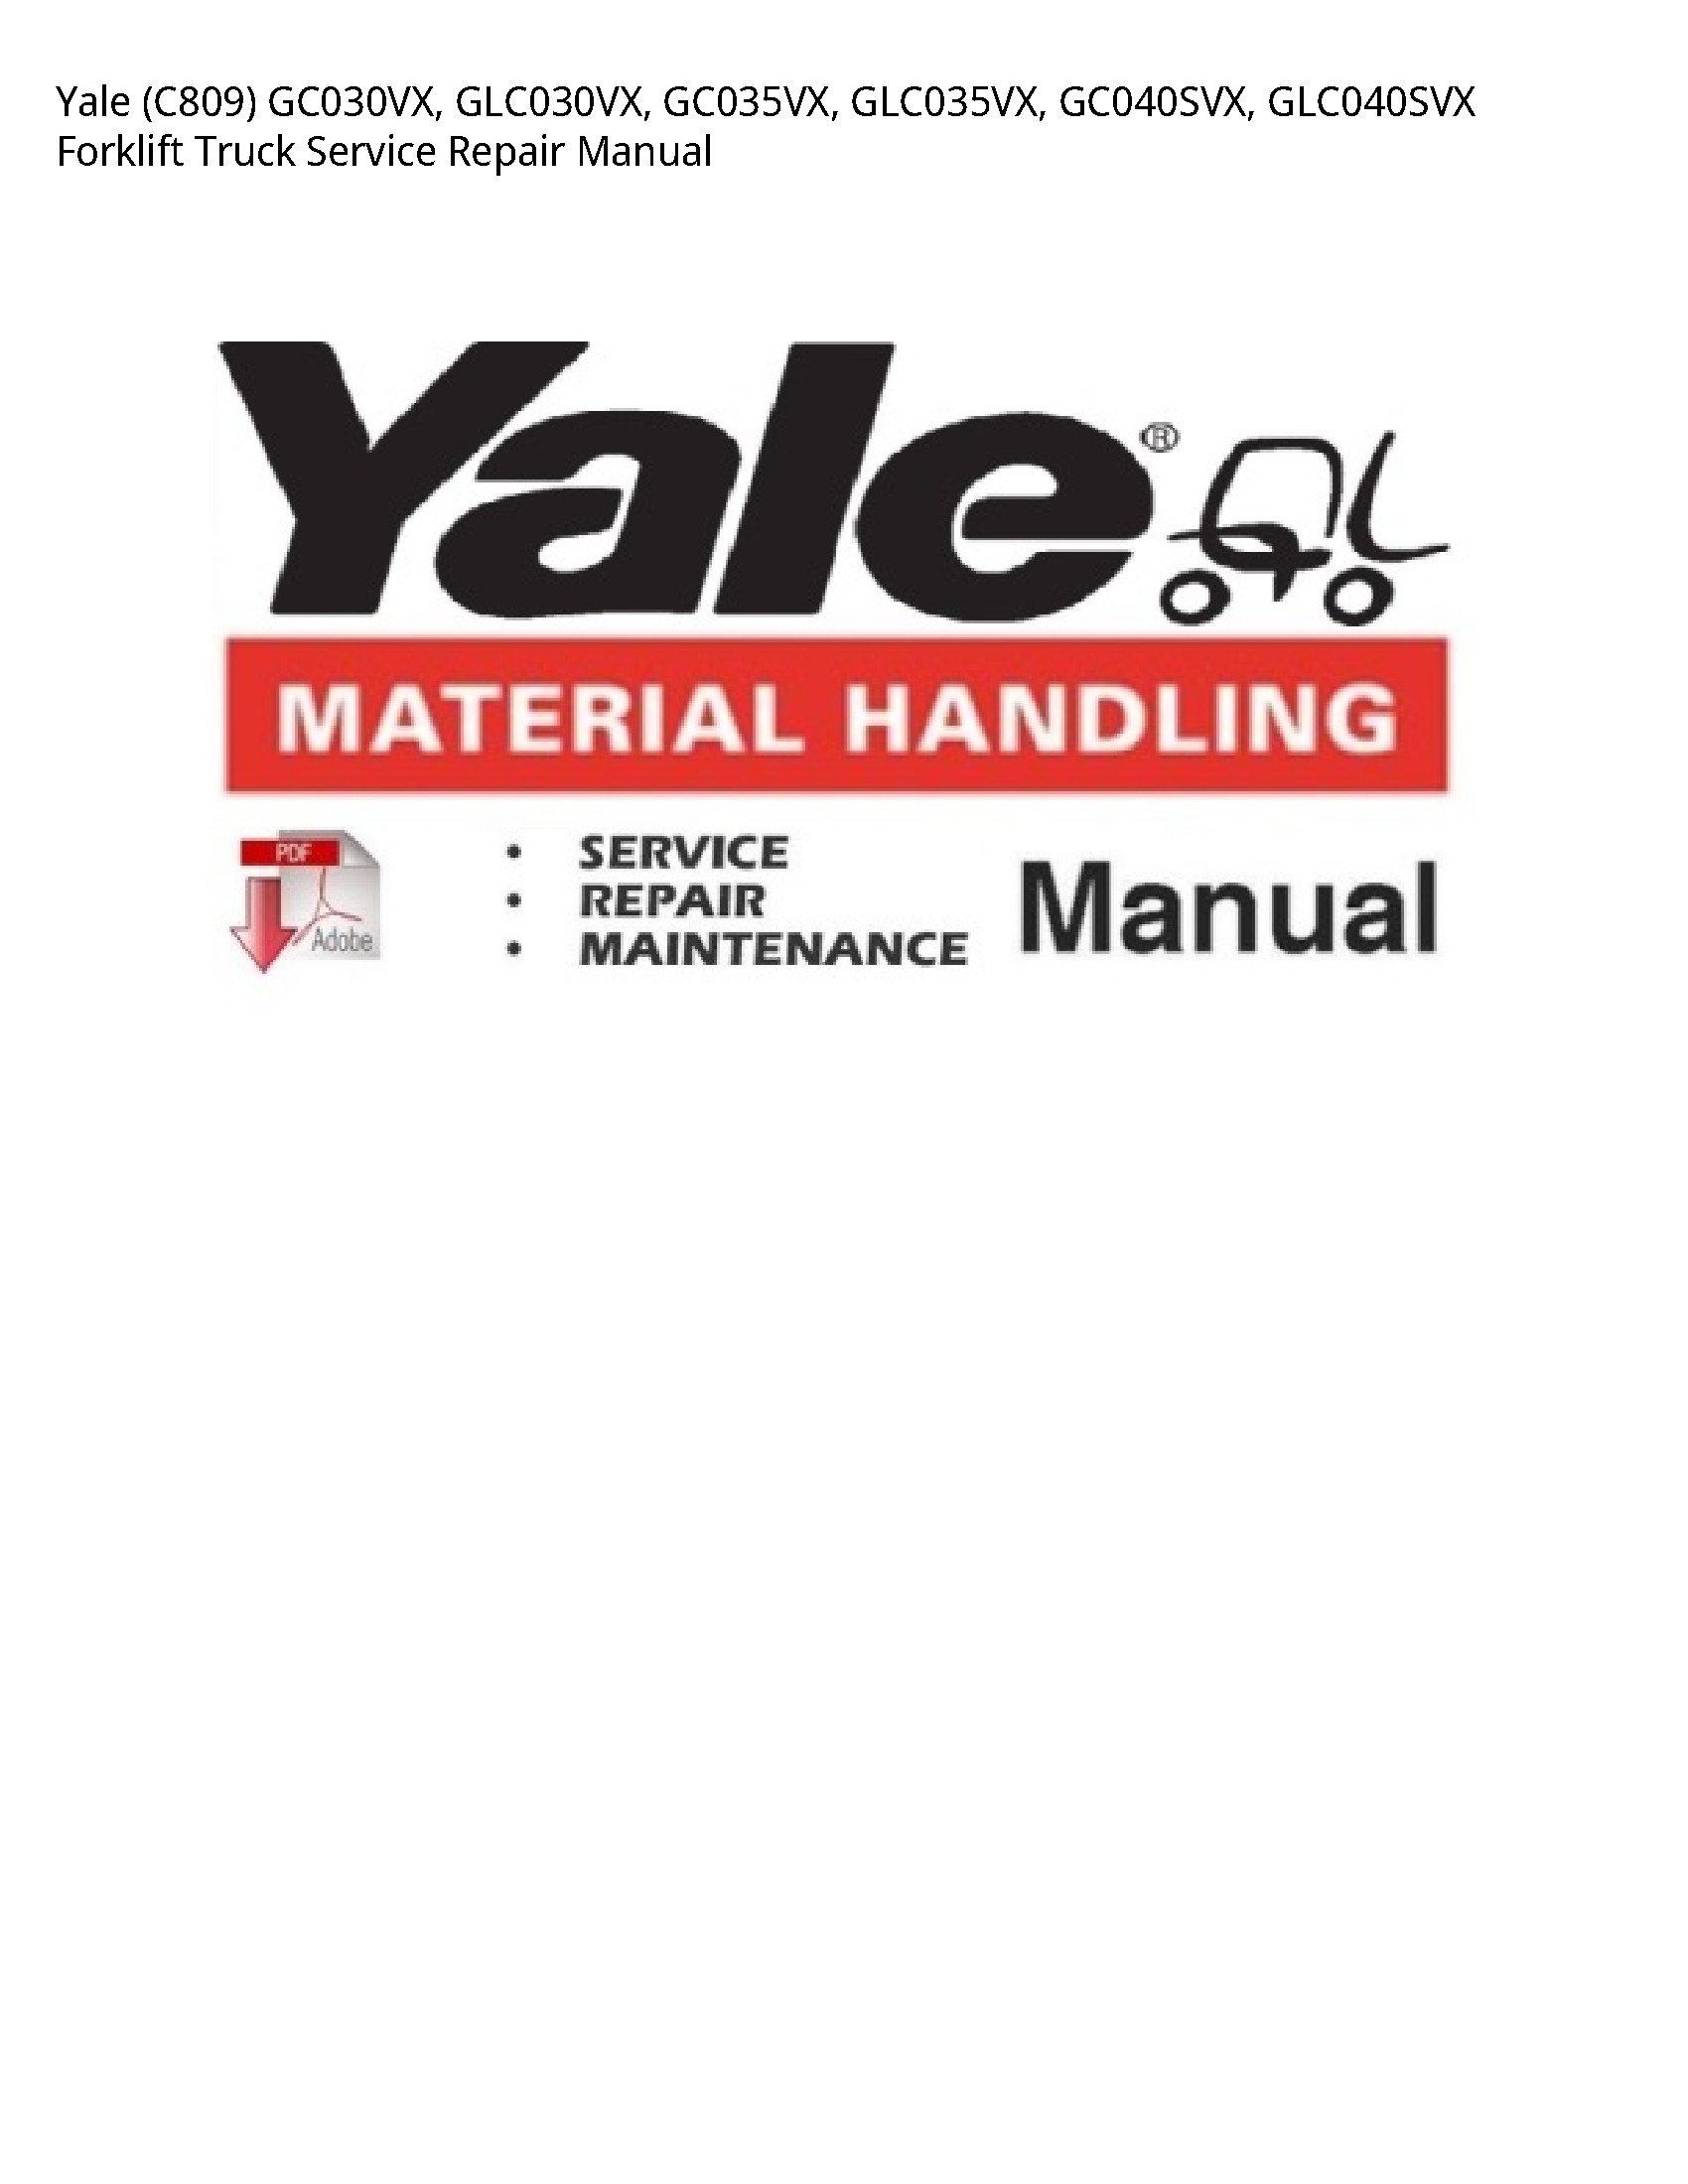 Yale (C809) Forklift Truck manual